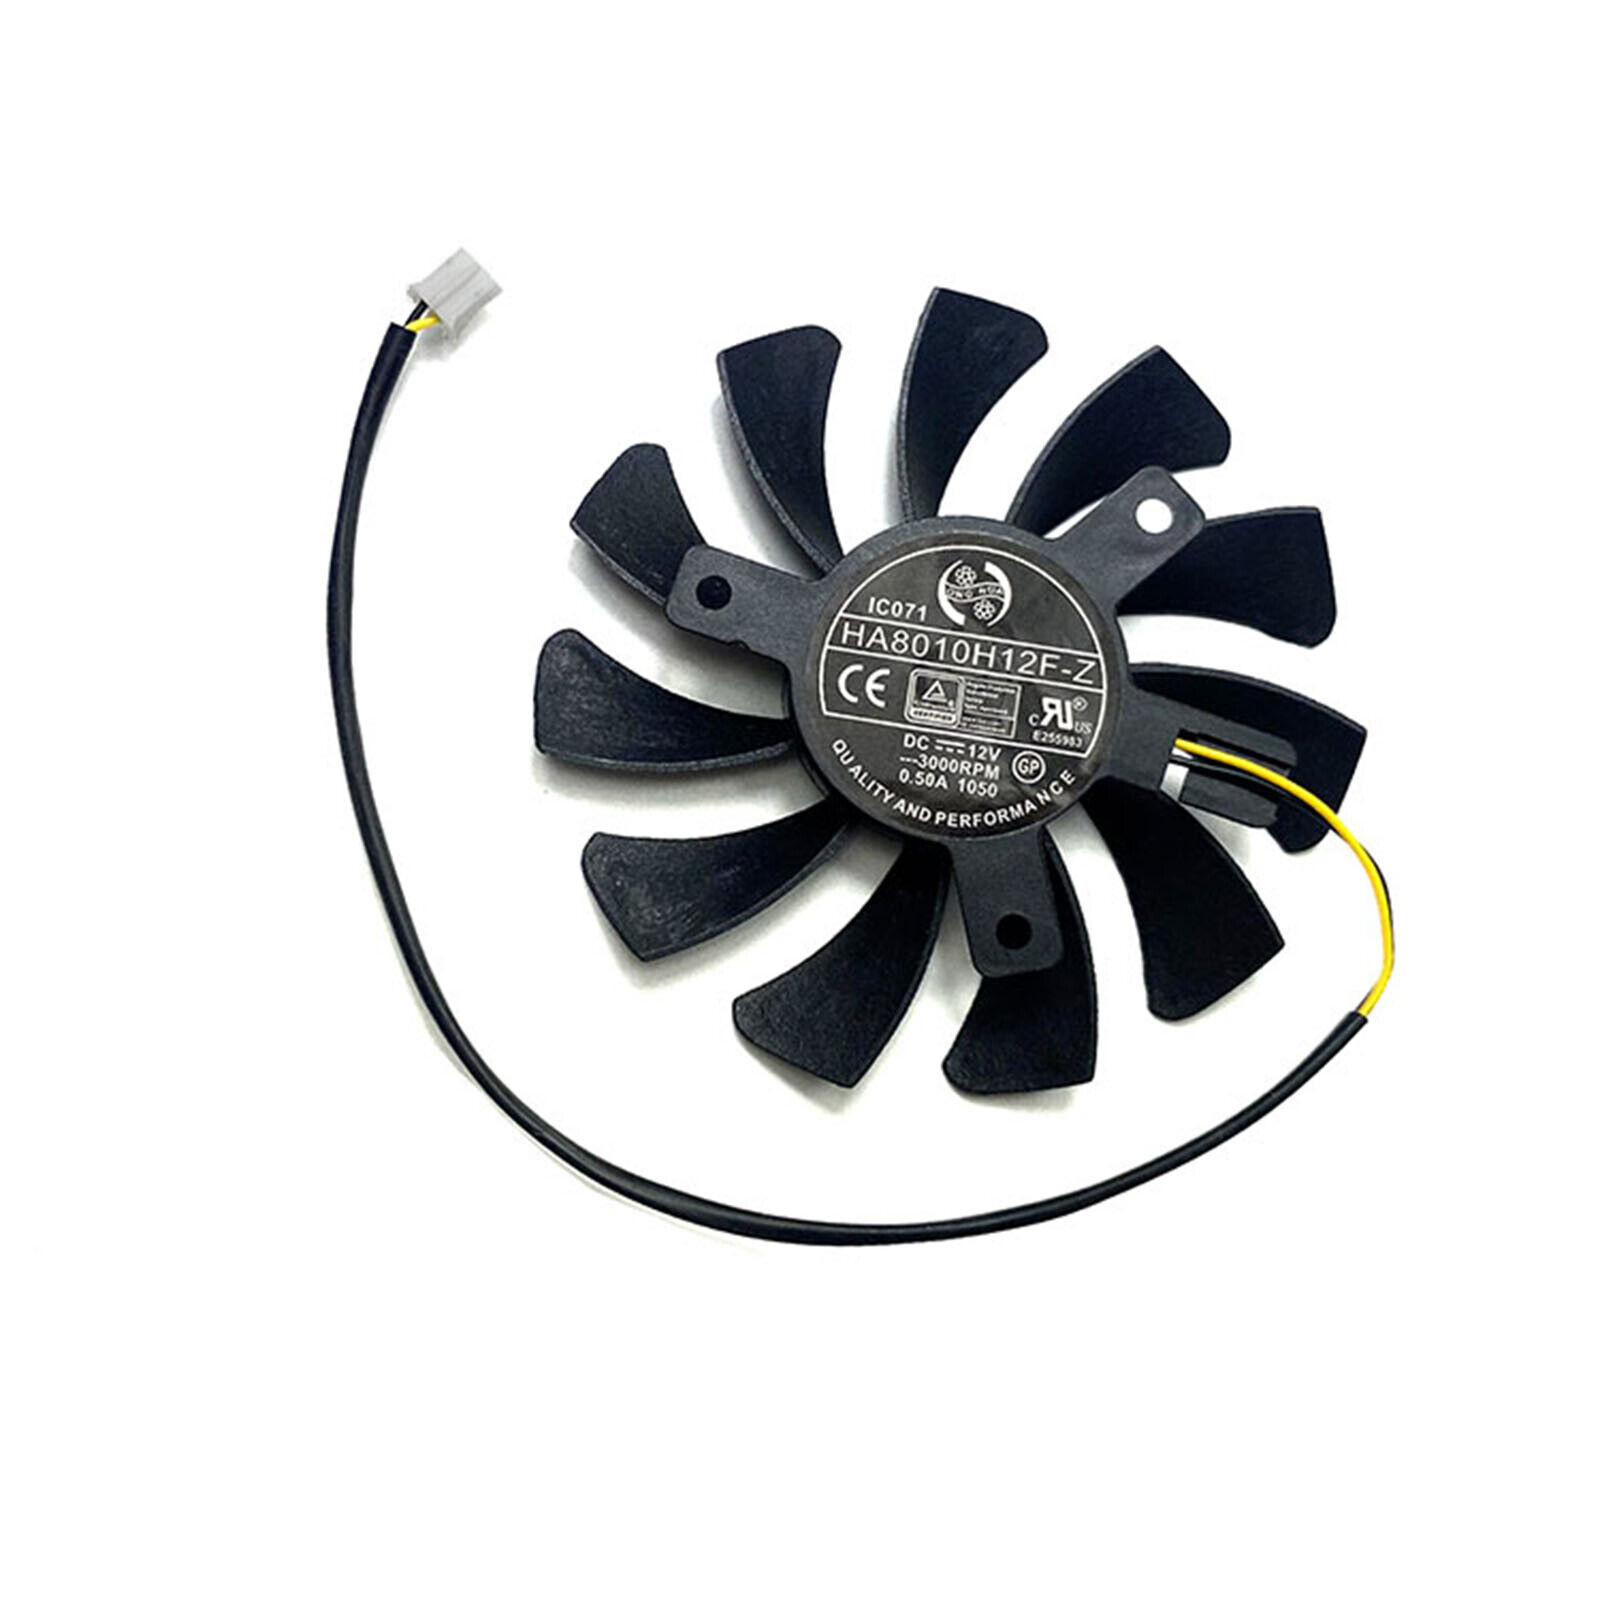 Graphics Card Cooling Fan for MSI GTX750TI 750 740 730 1GB ITX Graphics Card